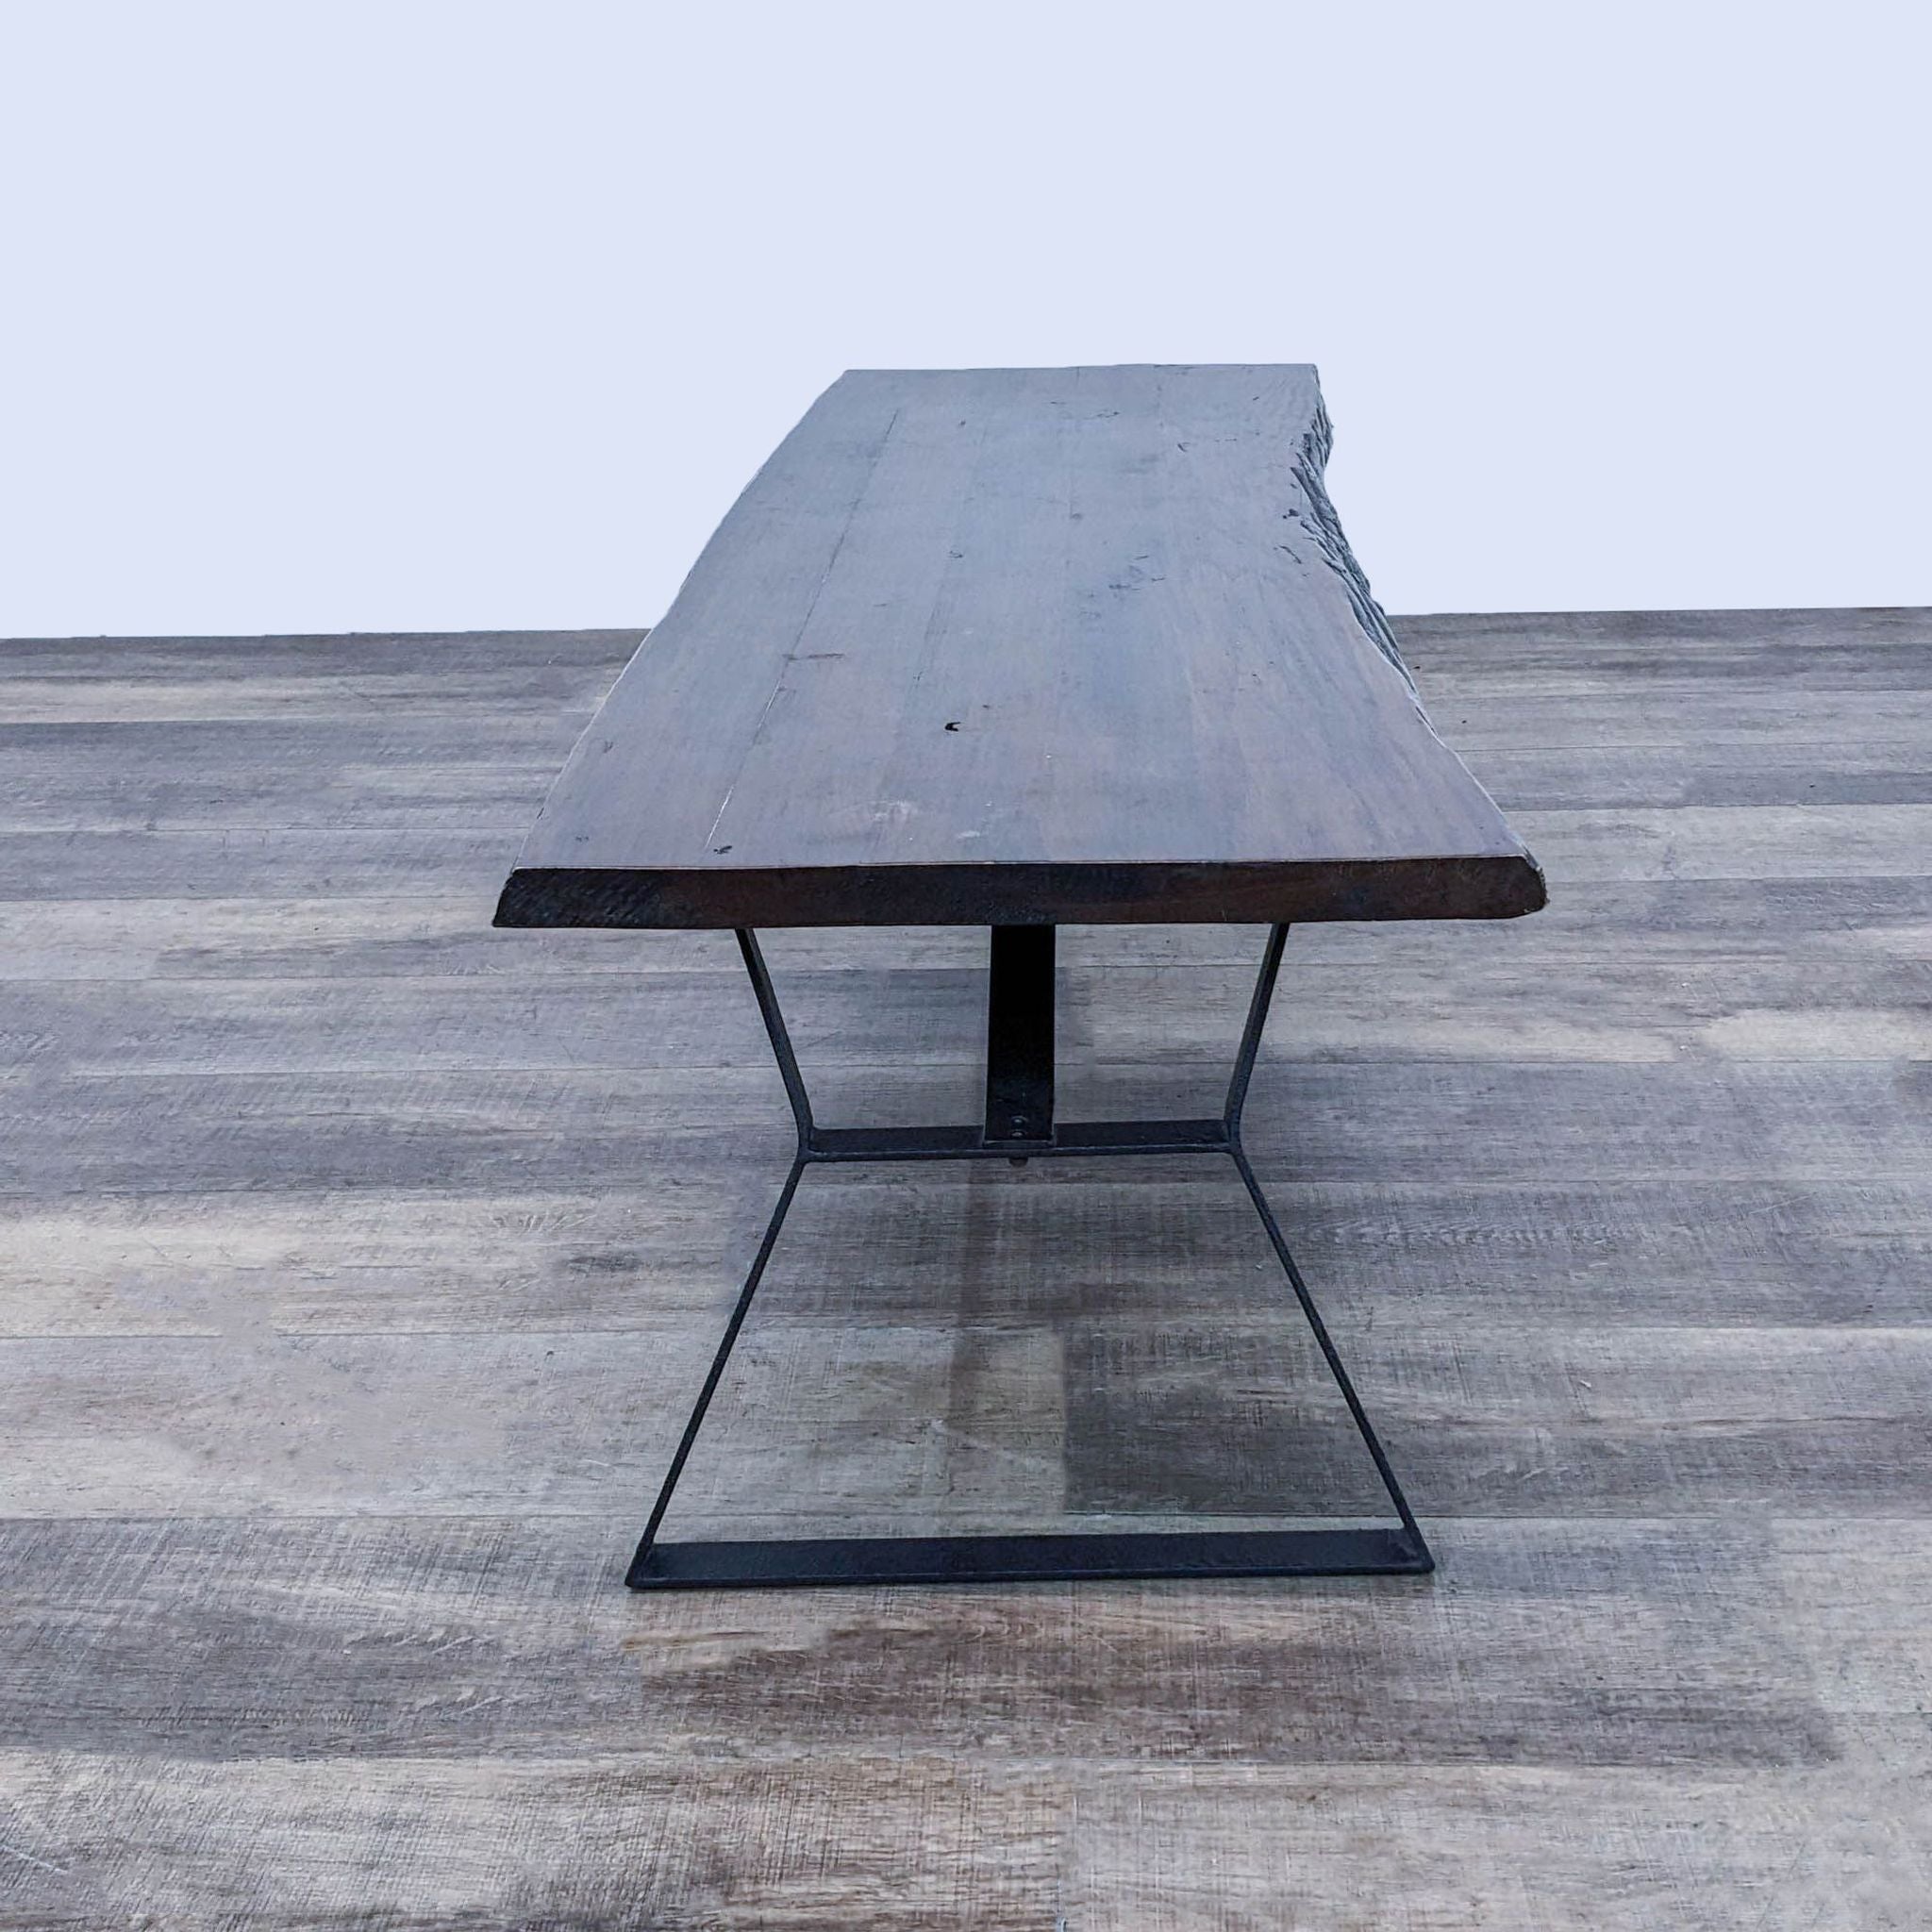 Reperch brand coffee table with a rectangular dark wood top and a metal base on a wooden floor.